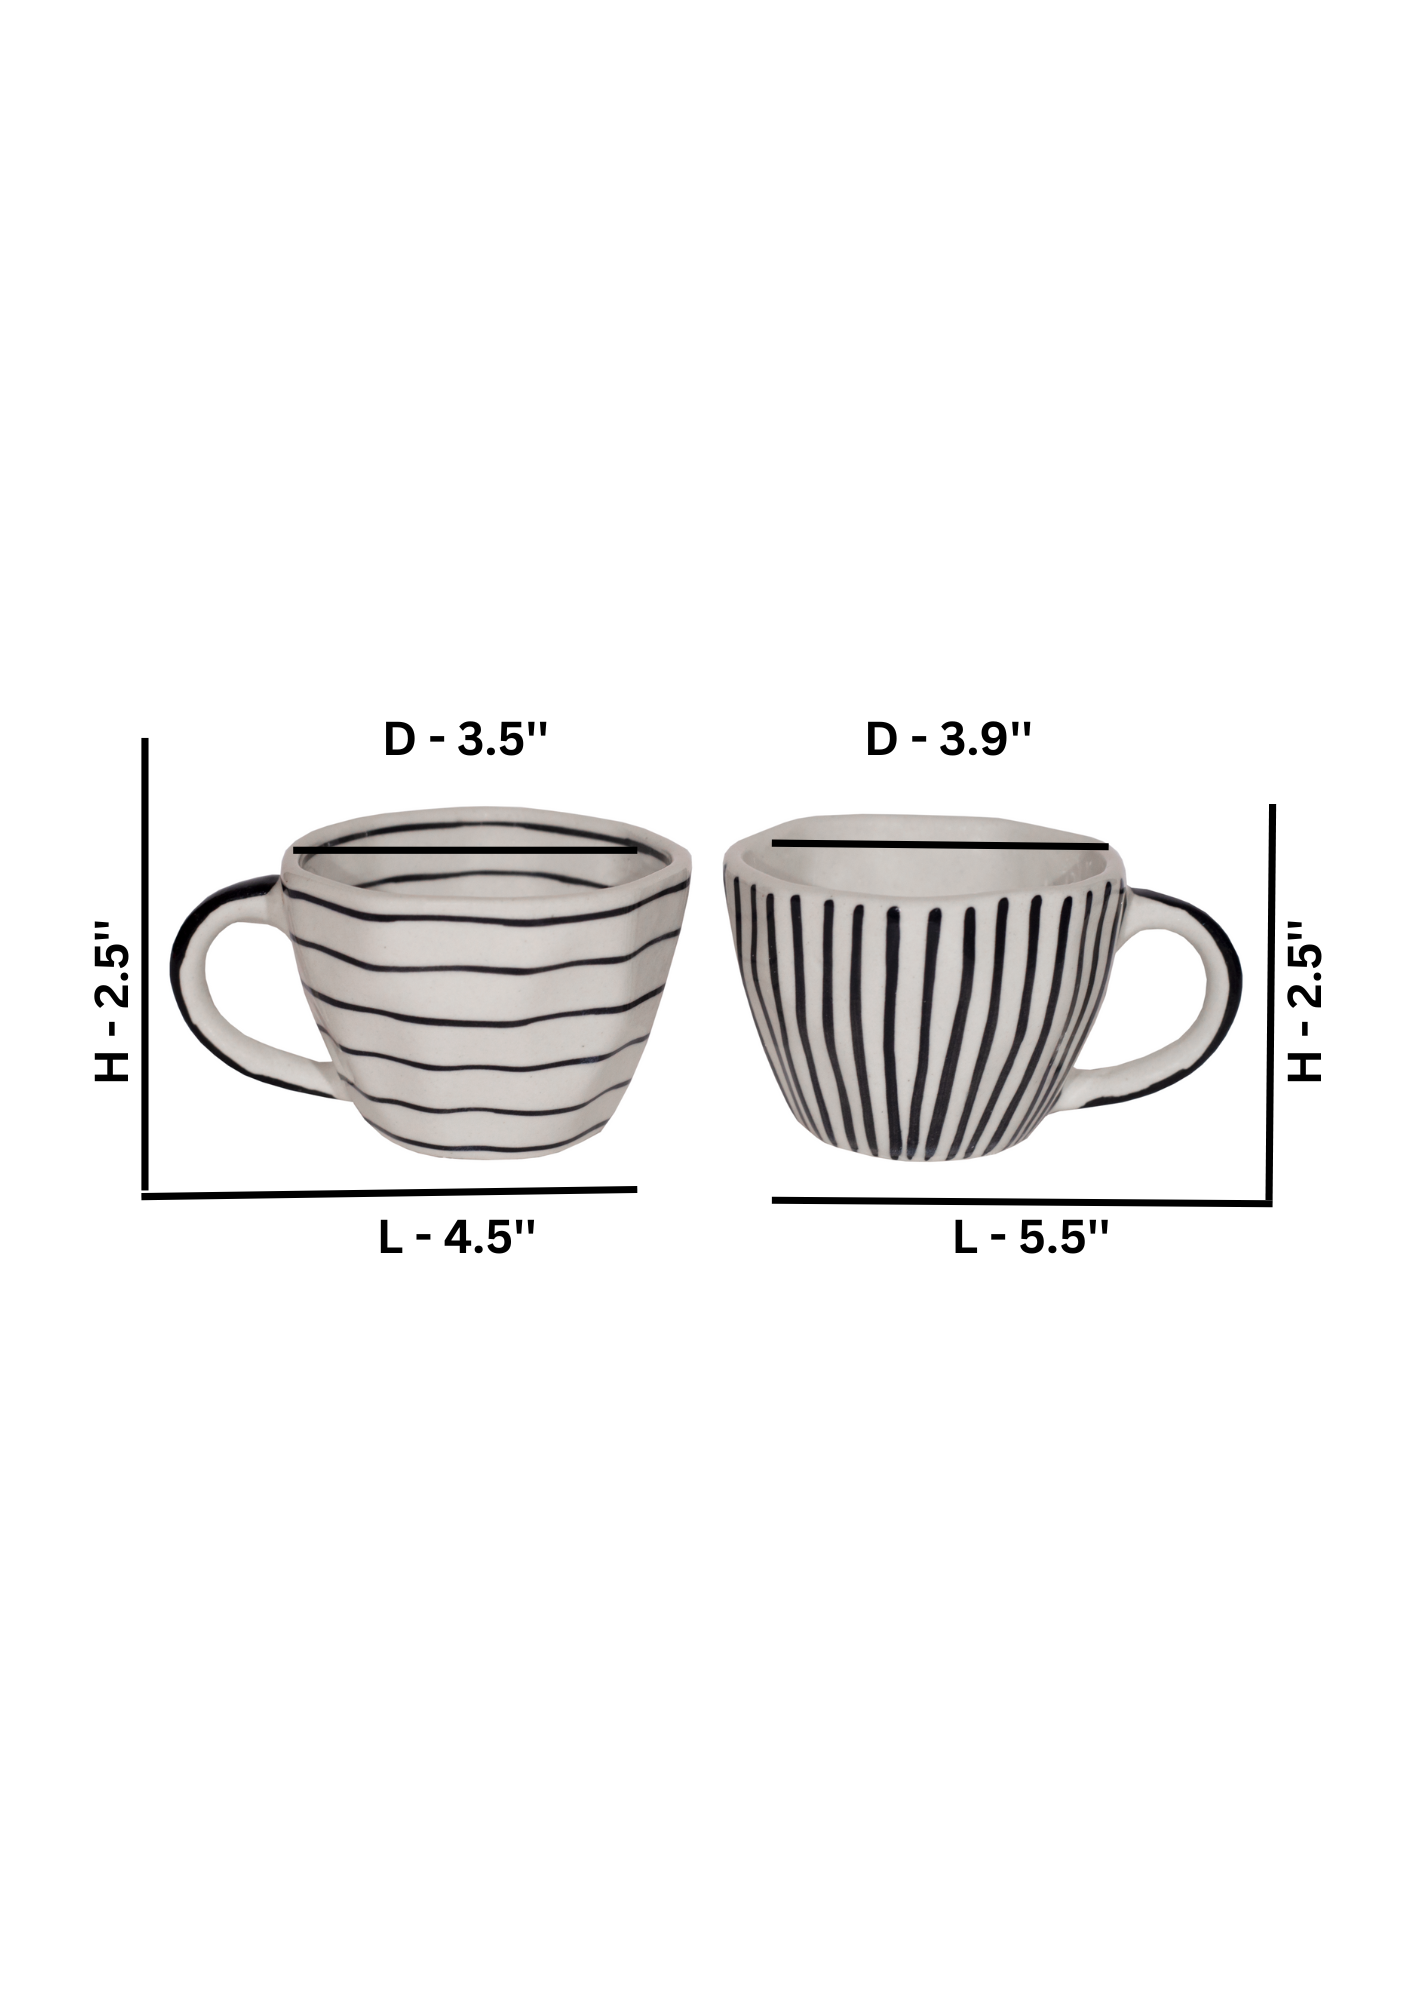 Horizontal and Vertical Black & White Handpainted And Glazed Ceramic Cups - Set of 2 Cups